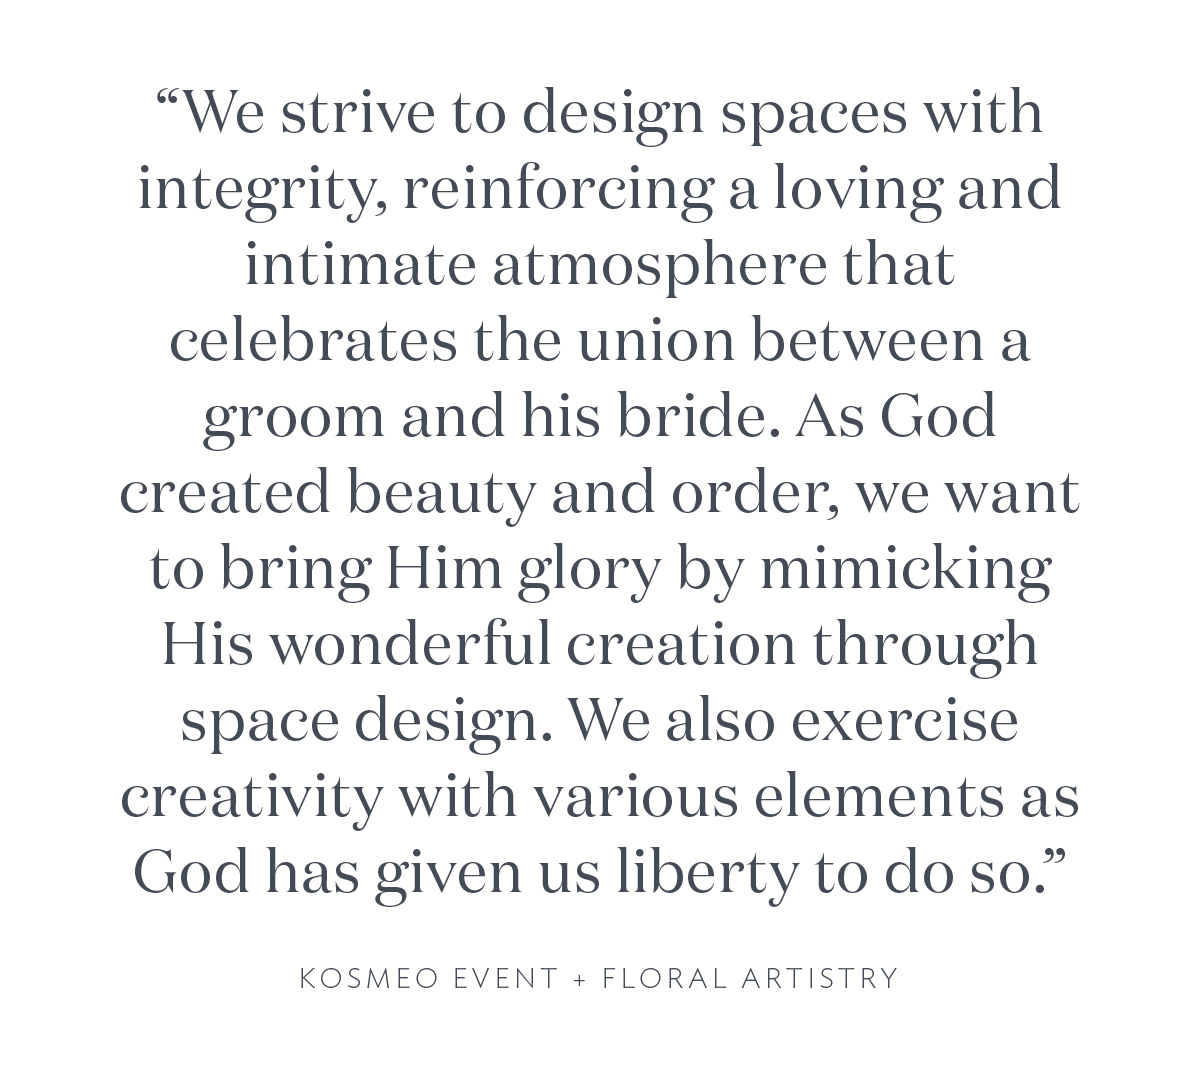 "We strive to design spaces with integrity, reinforcing a loving and intimate atmosphere that celebrates the union between a groom and his bride. As God created beauty and order, we want to bring Him glory by mimicking His wonderful creation through space design. We also exercise creativity with various elements as God has given us liberty to do so." Kosmeo Event + Floral Artistry